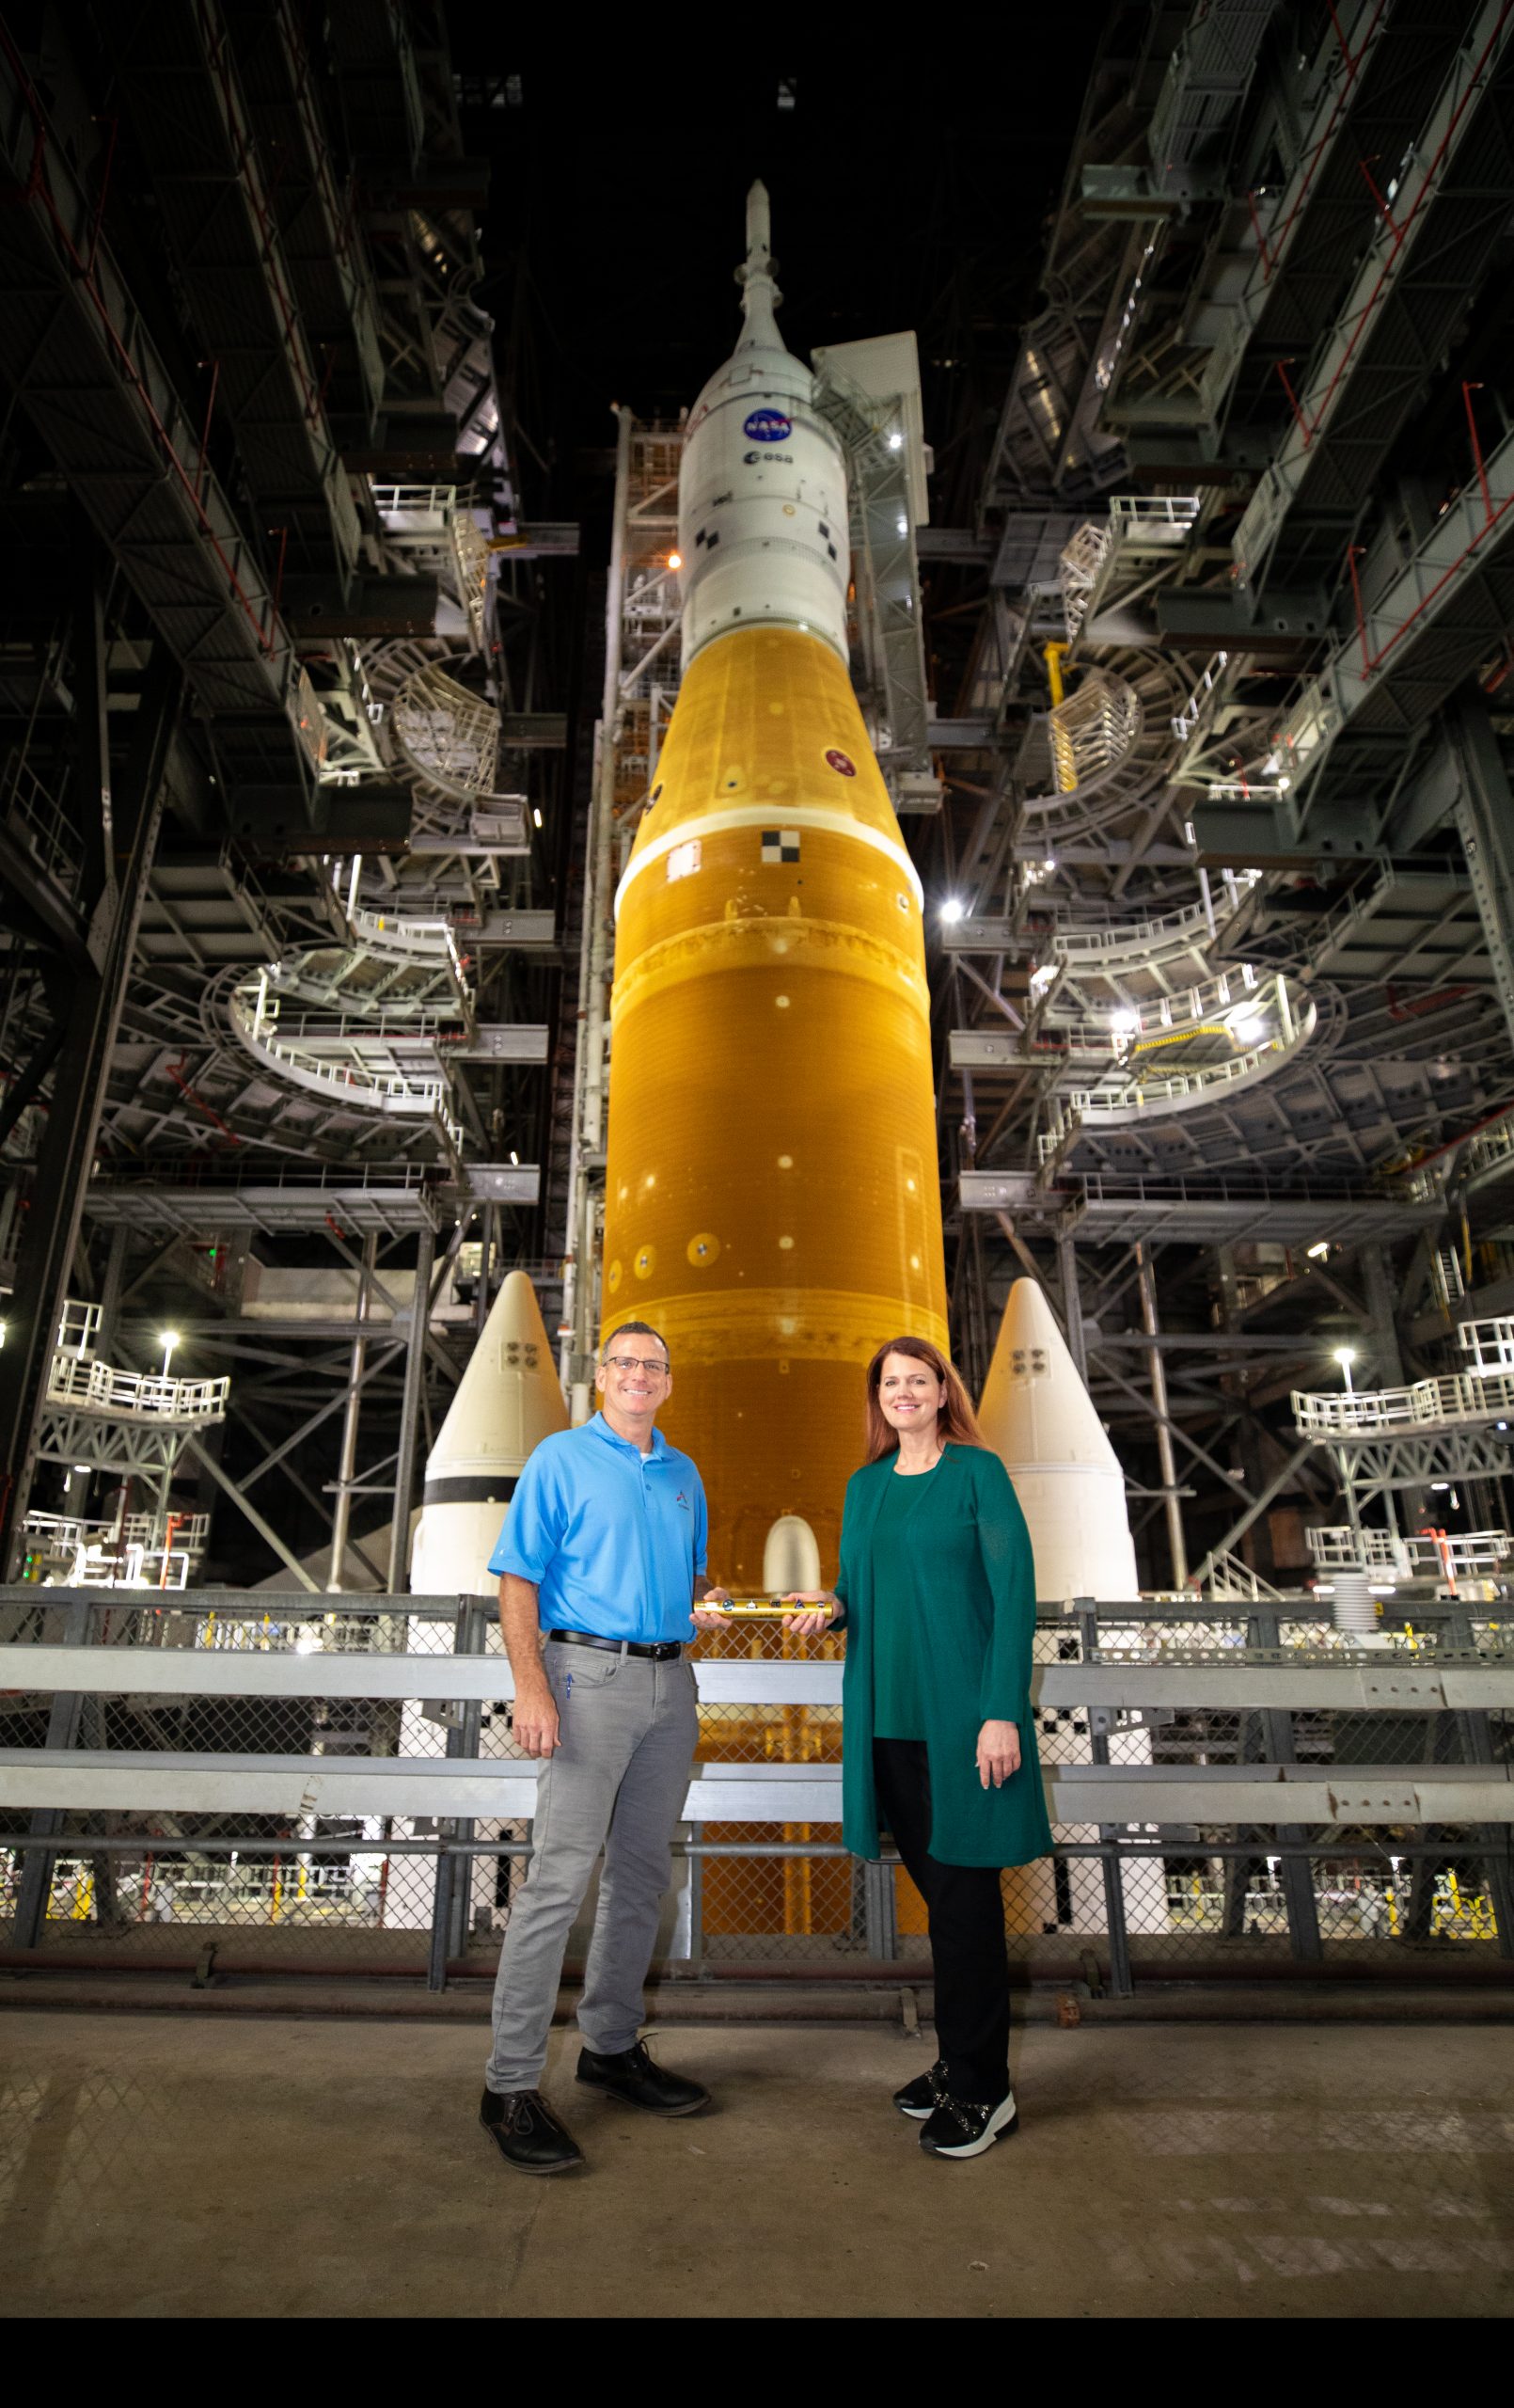 Ground operations manager Clif Lanham with Exploration Ground Systems passed the baton to Charlie Blackwell-Thompson, Artemis I launch director, inside the Vehicle Assembly Building at NASA’s Kennedy Space Center in Florida on March 16, 2022. Behind them is the Artemis I Space Launch System with the Orion spacecraft atop the mobile launcher. Charlie is a vital team member for the Artemis Mission, NASA’s first initiative to return humans to the moon in more than 50 years.  Photography courtesy of NASA